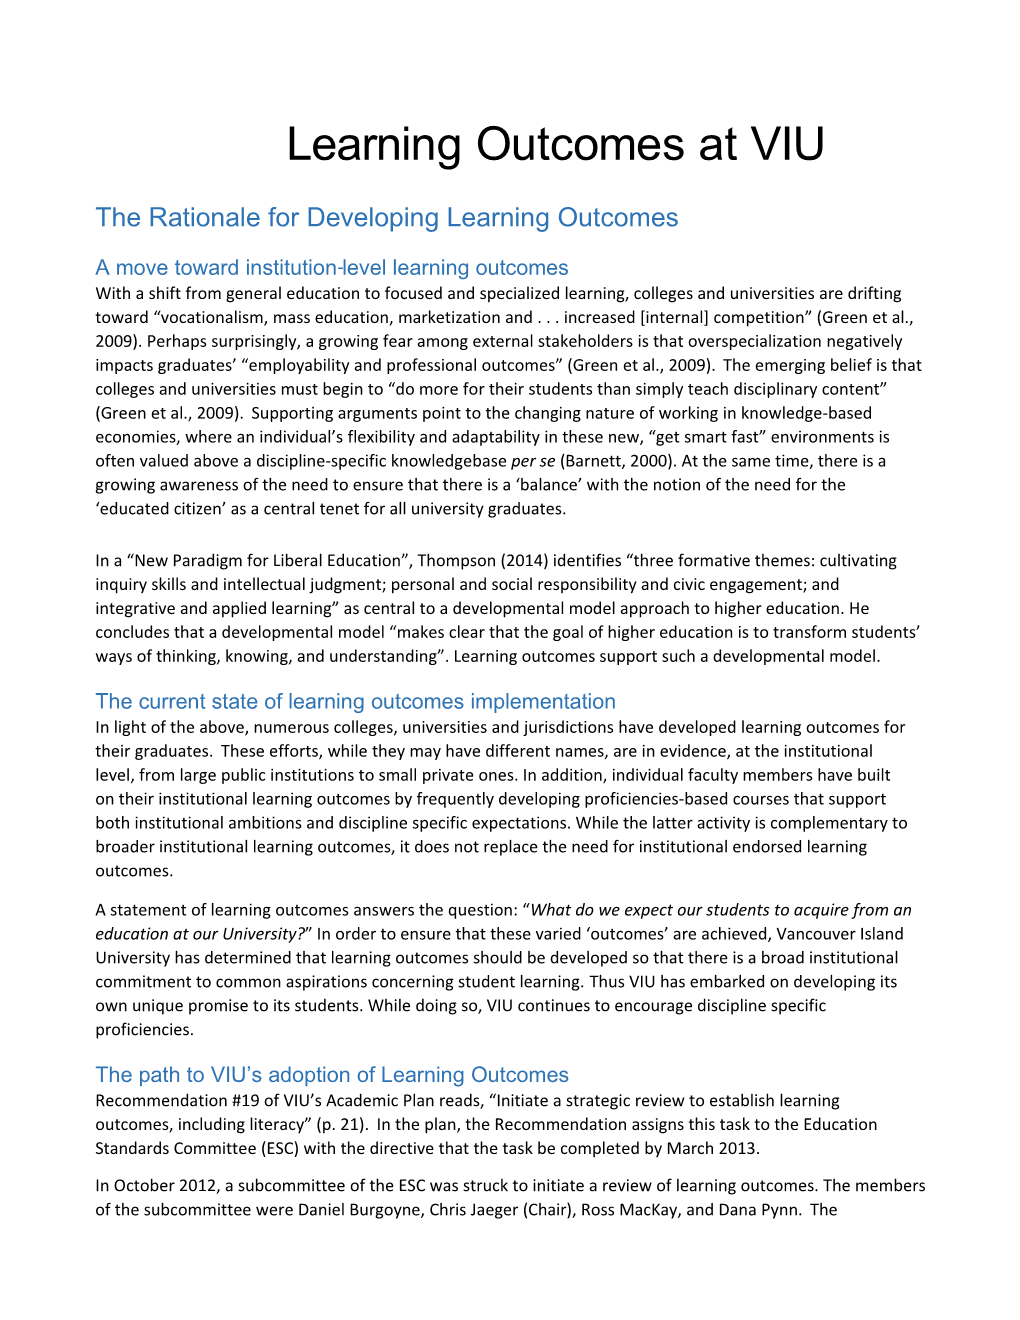 The Rationale for Developing Learning Outcomes